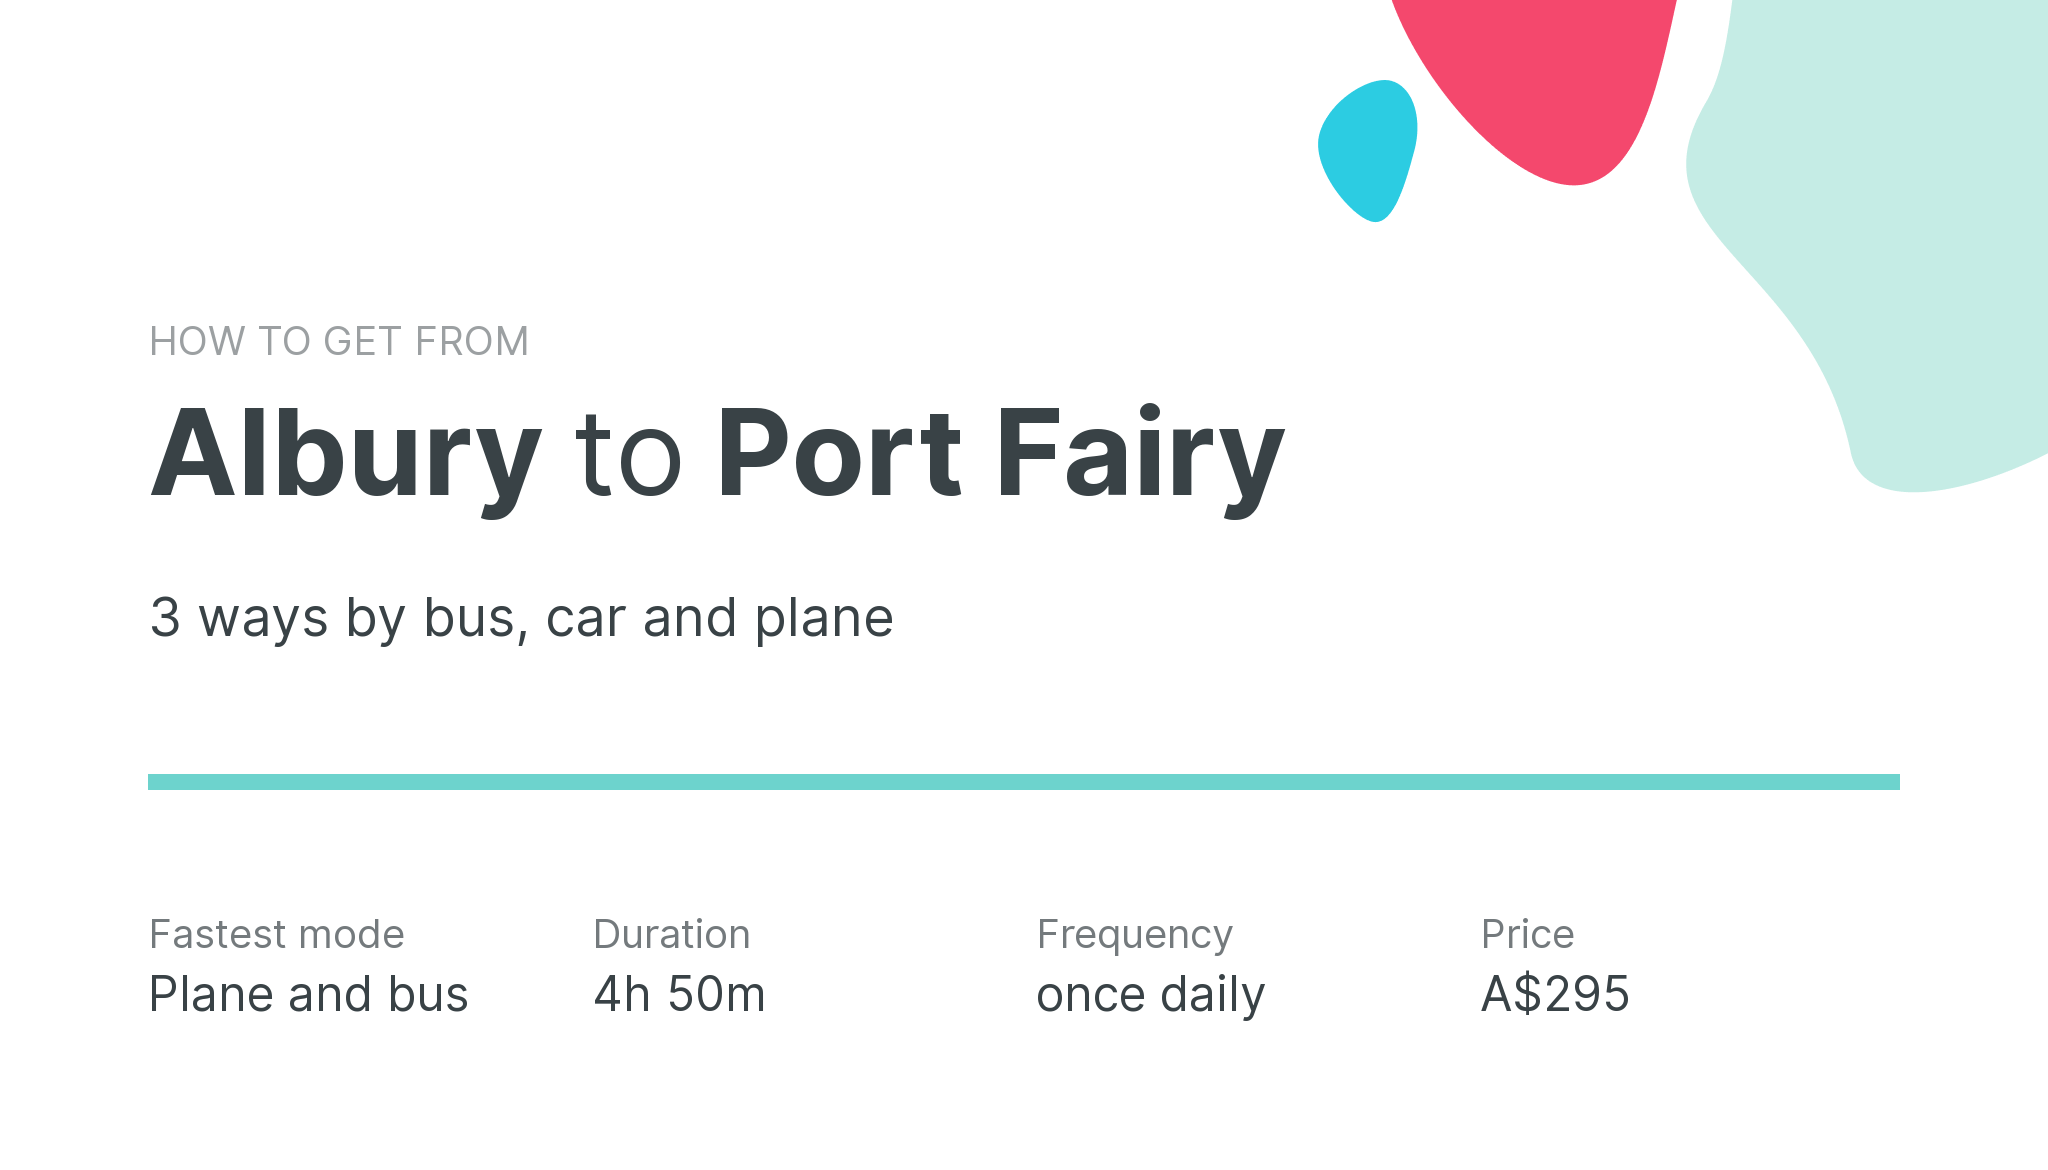 How do I get from Albury to Port Fairy